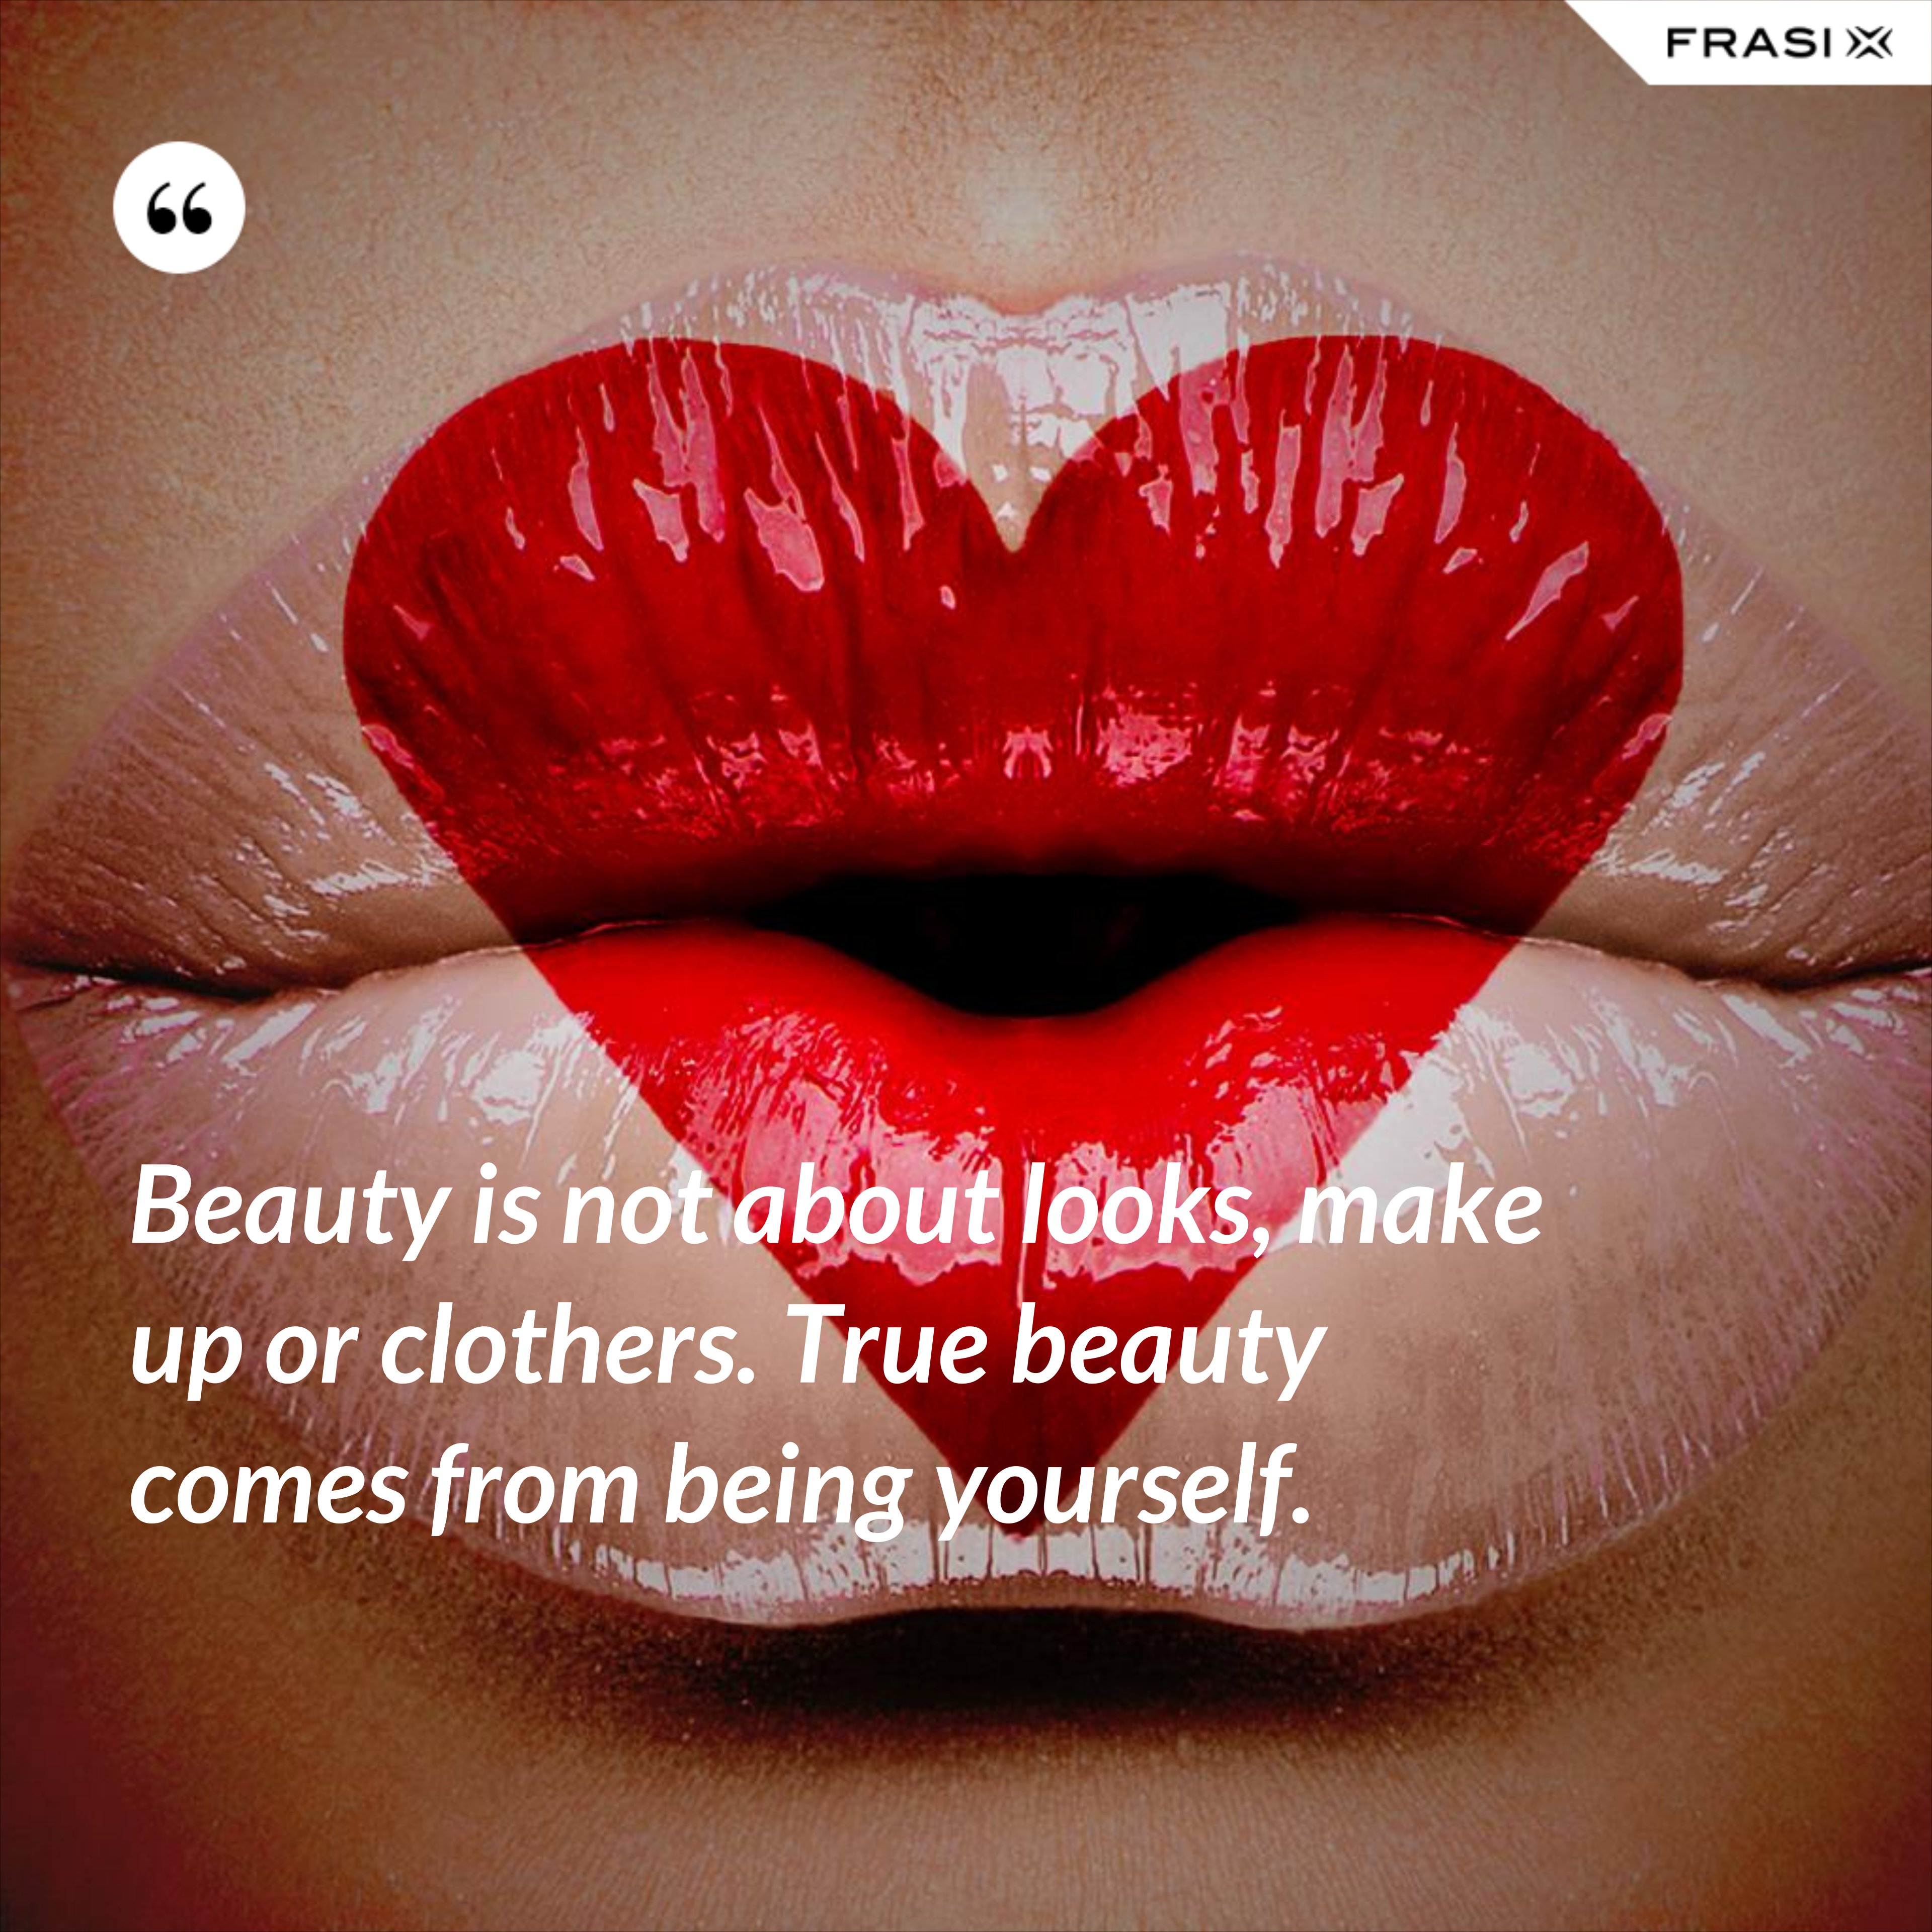 Beauty is not about looks, make up or clothers. True beauty comes from being yourself. - Anonimo